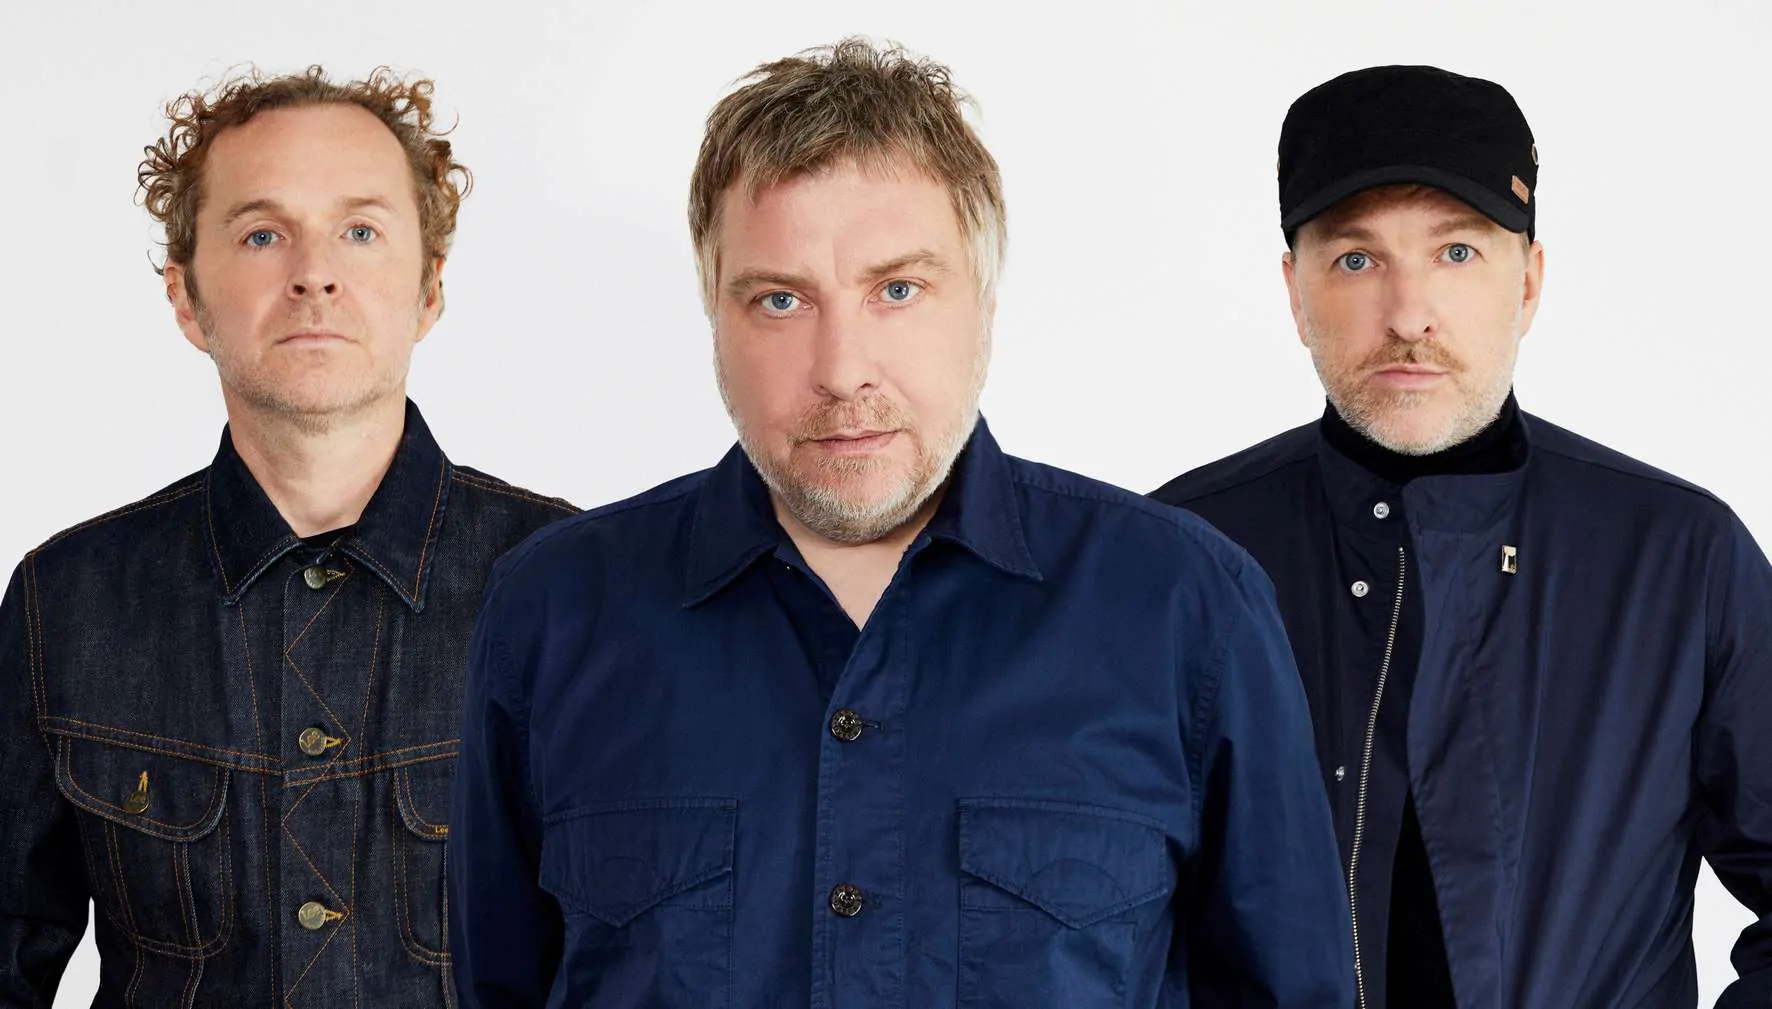 DOVES release ‘Cathedrals Of The Mind’ from their forthcoming, fifth album, The Universal Want